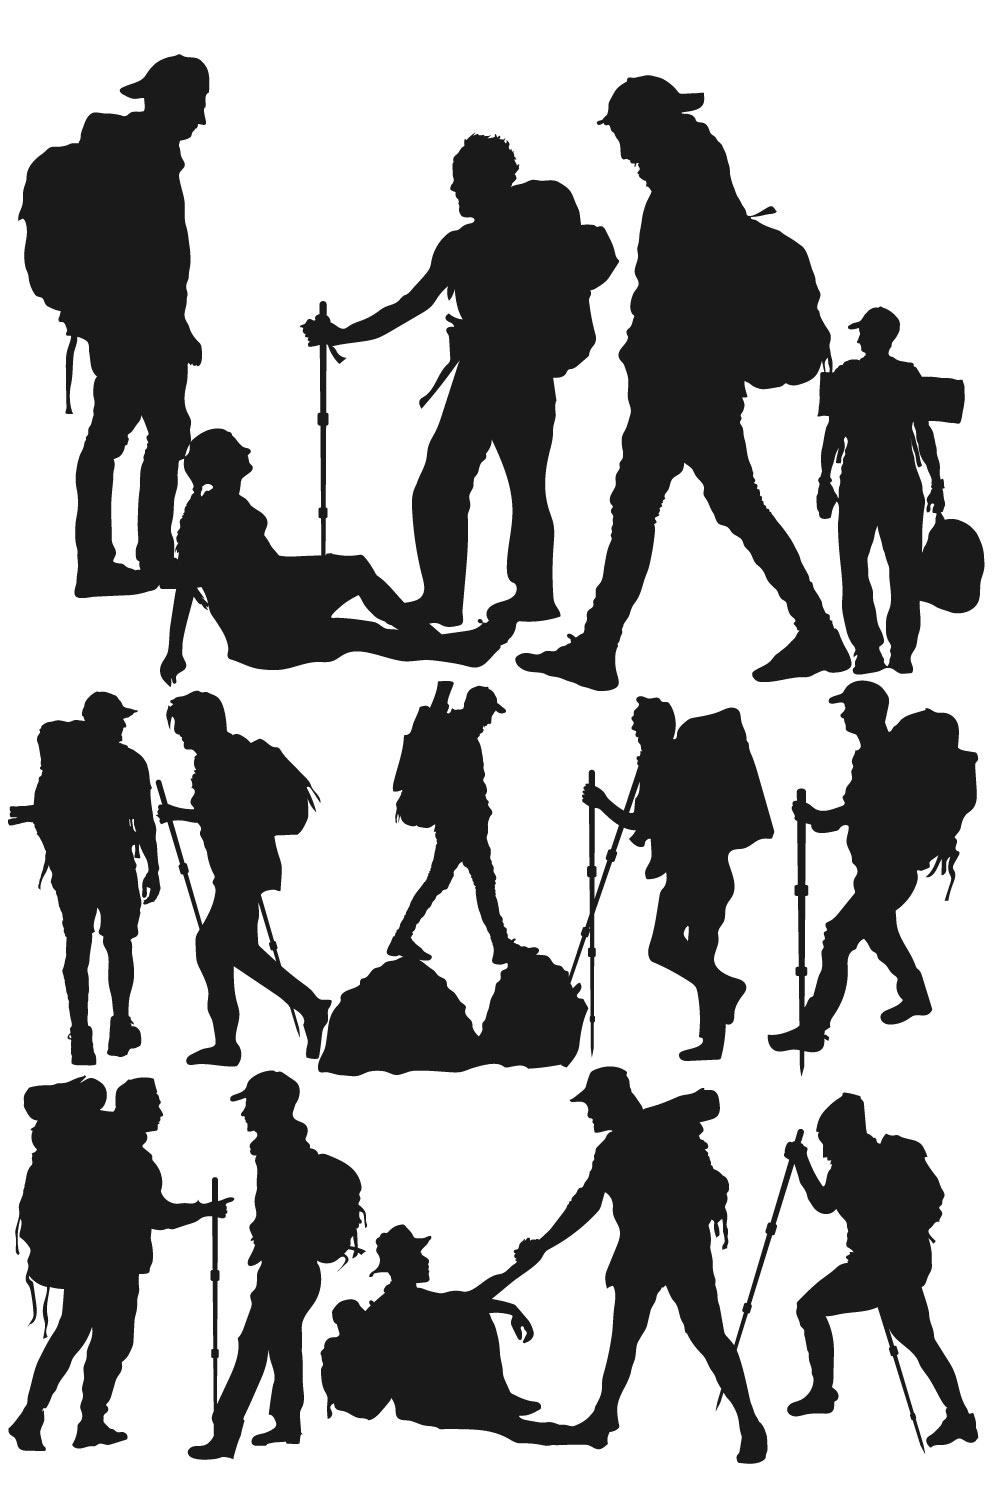 Adventure Climber hiker backpacker silhouette vector of a mountaineer pinterest preview image.